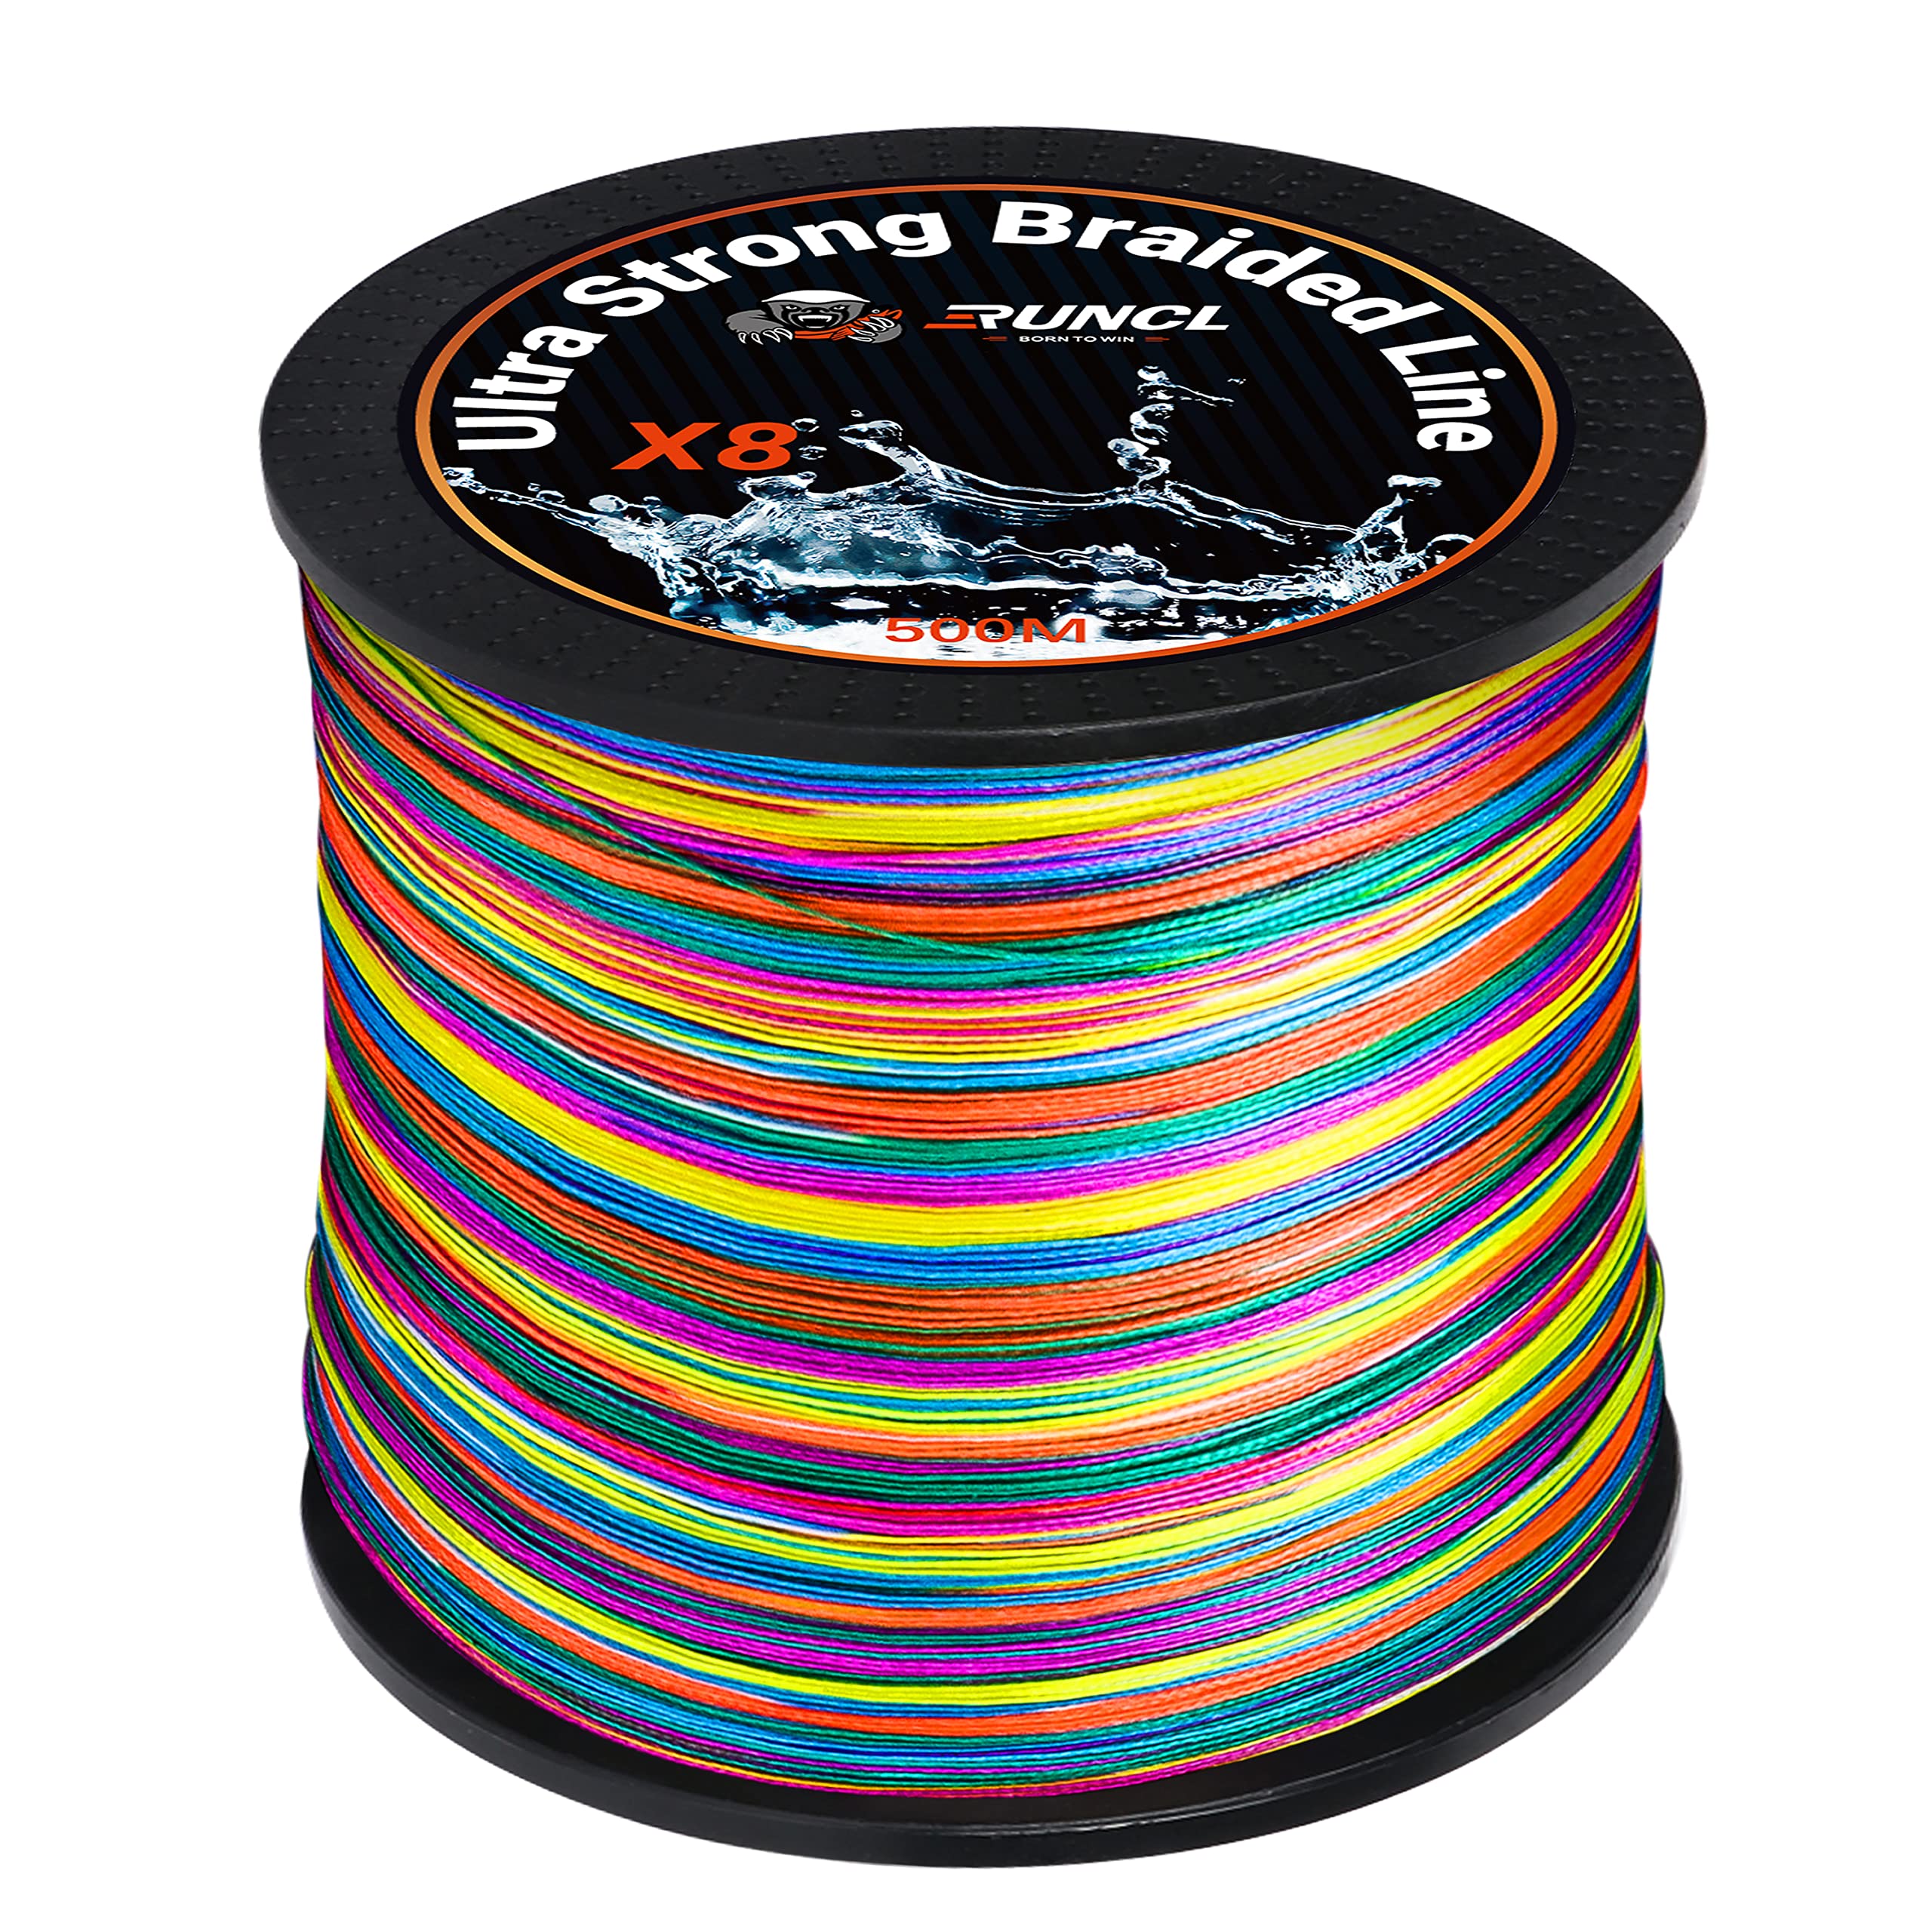 RUNCL Braided Fishing Line, 8 Strand Abrasion Resistant Braided